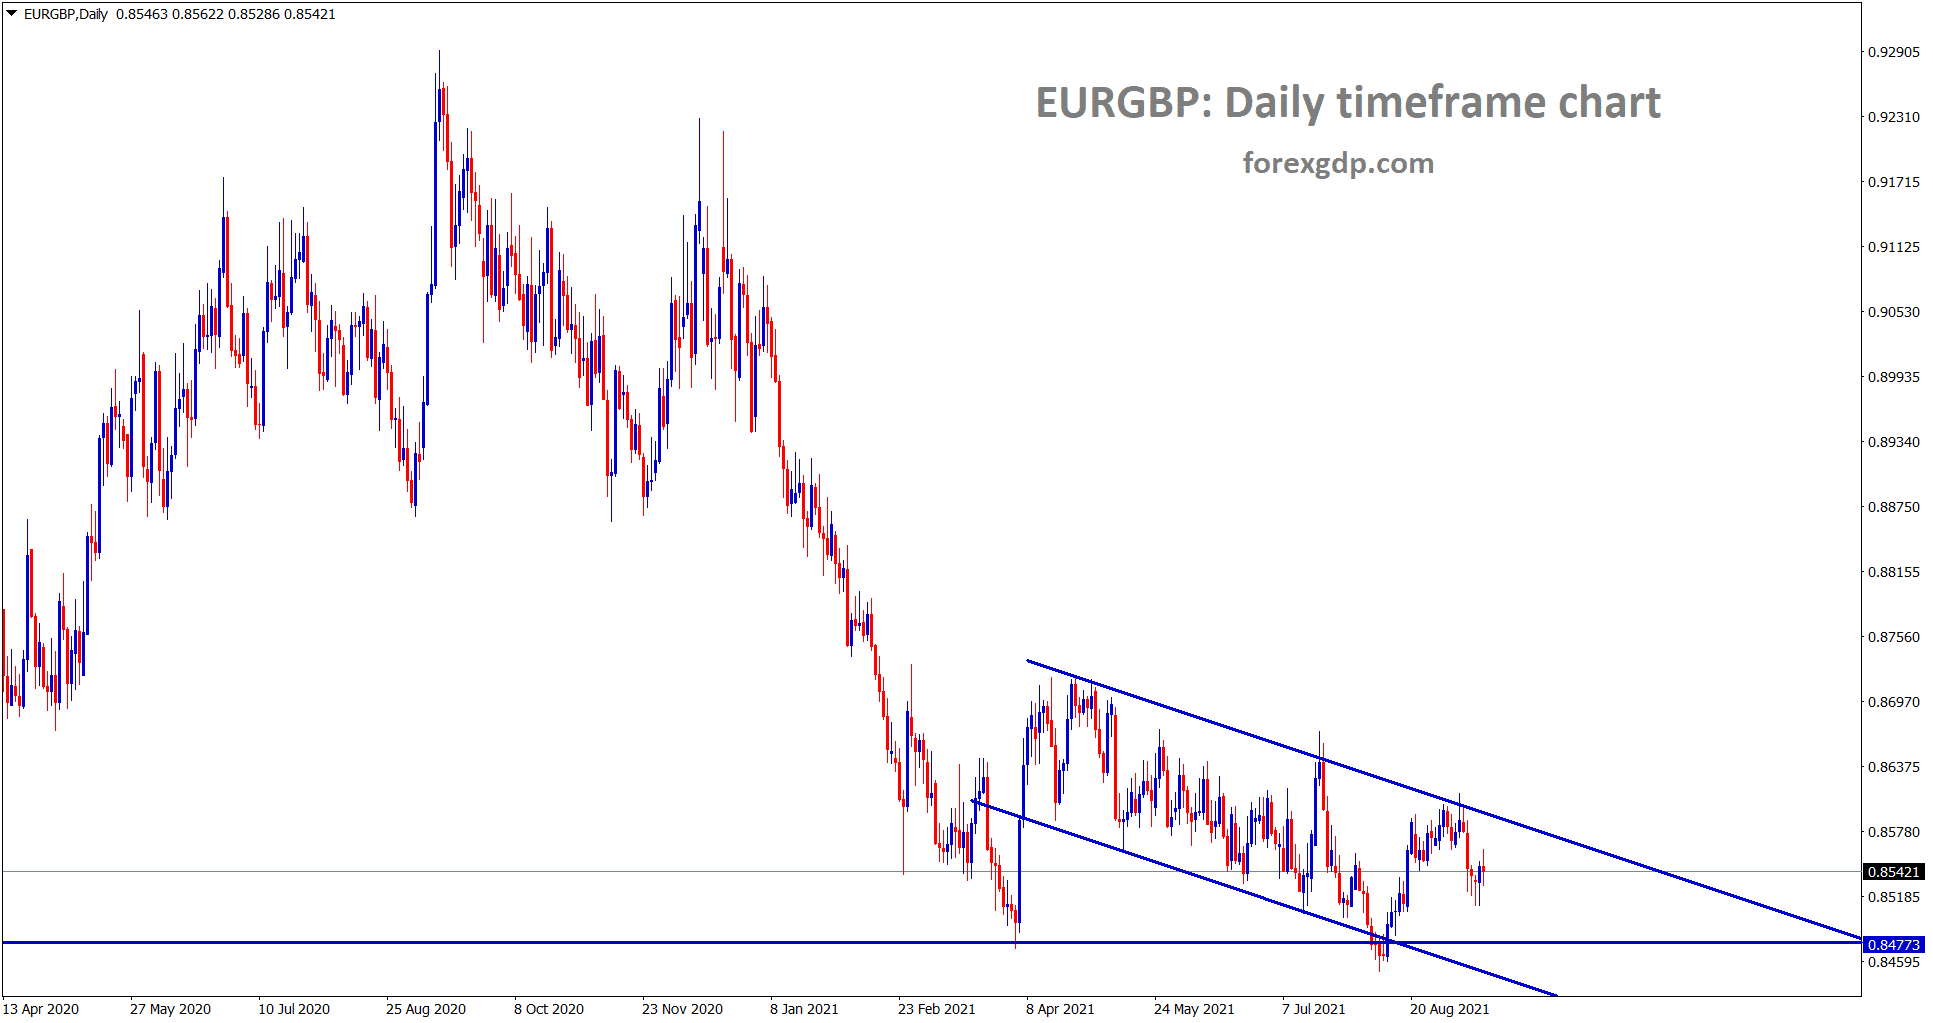 EURGBP is moving between the channel range